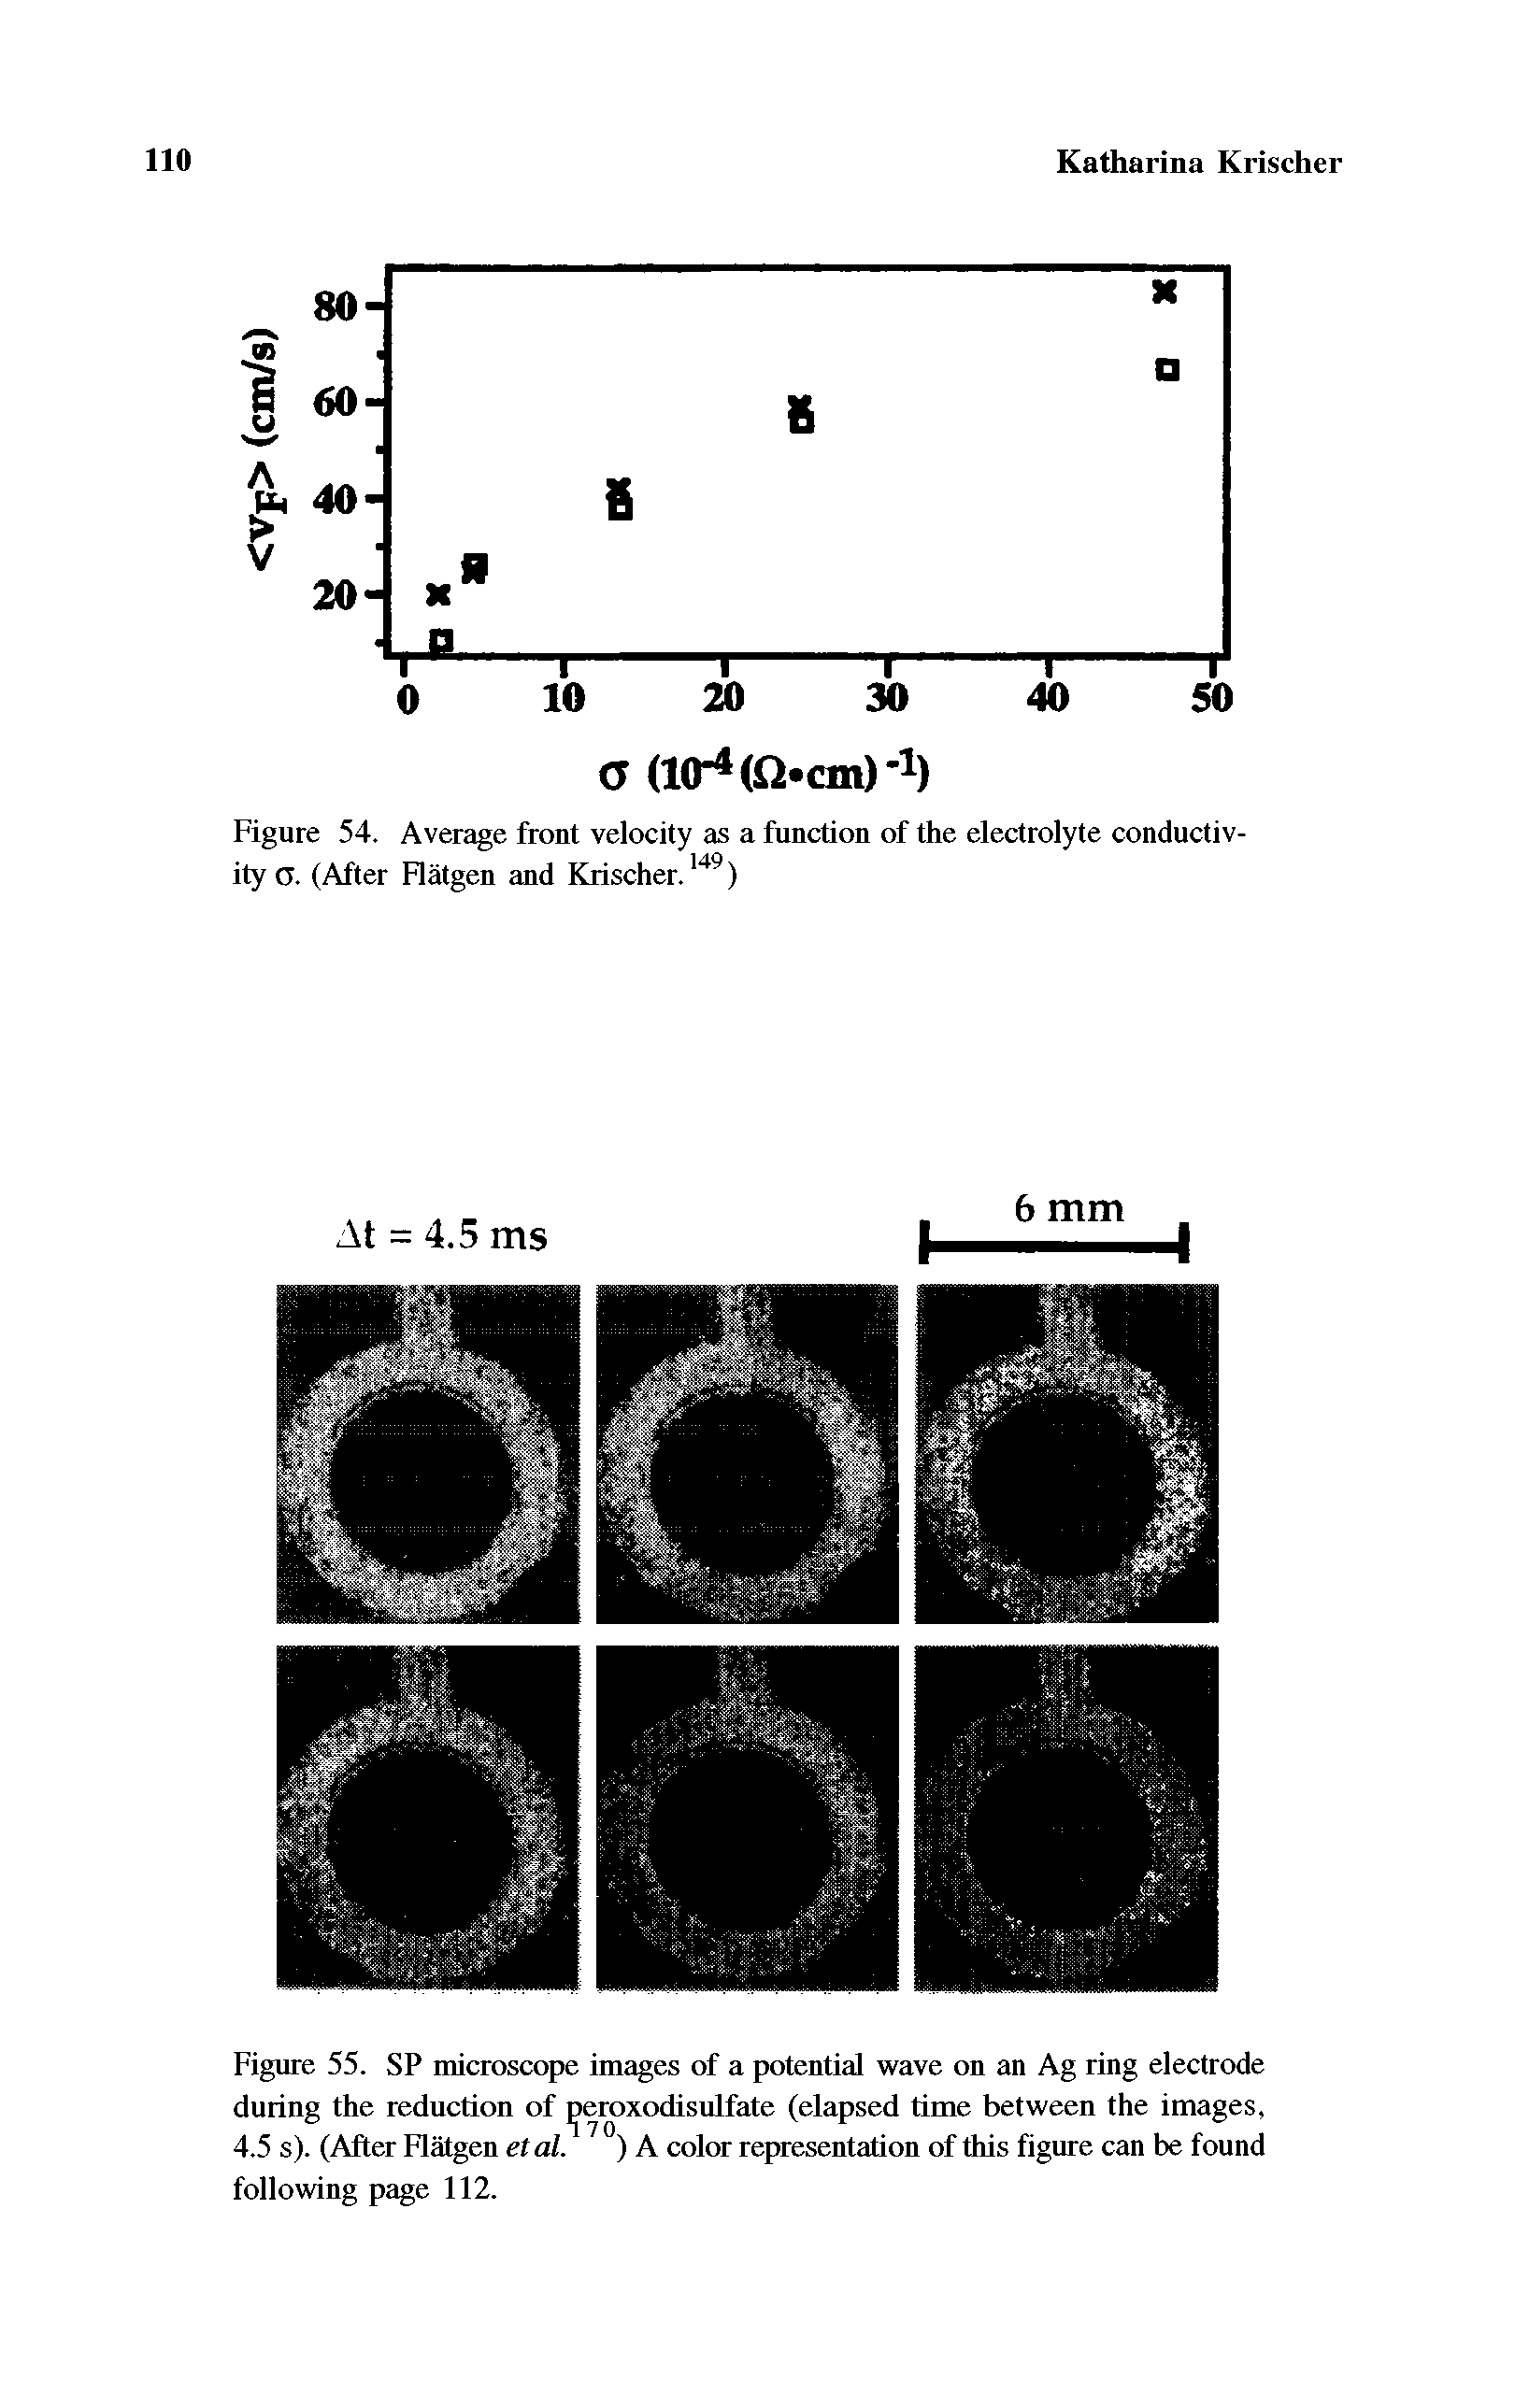 Figure 55. SP microscope images of a potential wave on an Ag ring electrode during the reduction of eroxodisulfate (elapsed time between the images, 4.5 s). (After Flatgen etal. ) A color representation of this figure can be found following page 112.